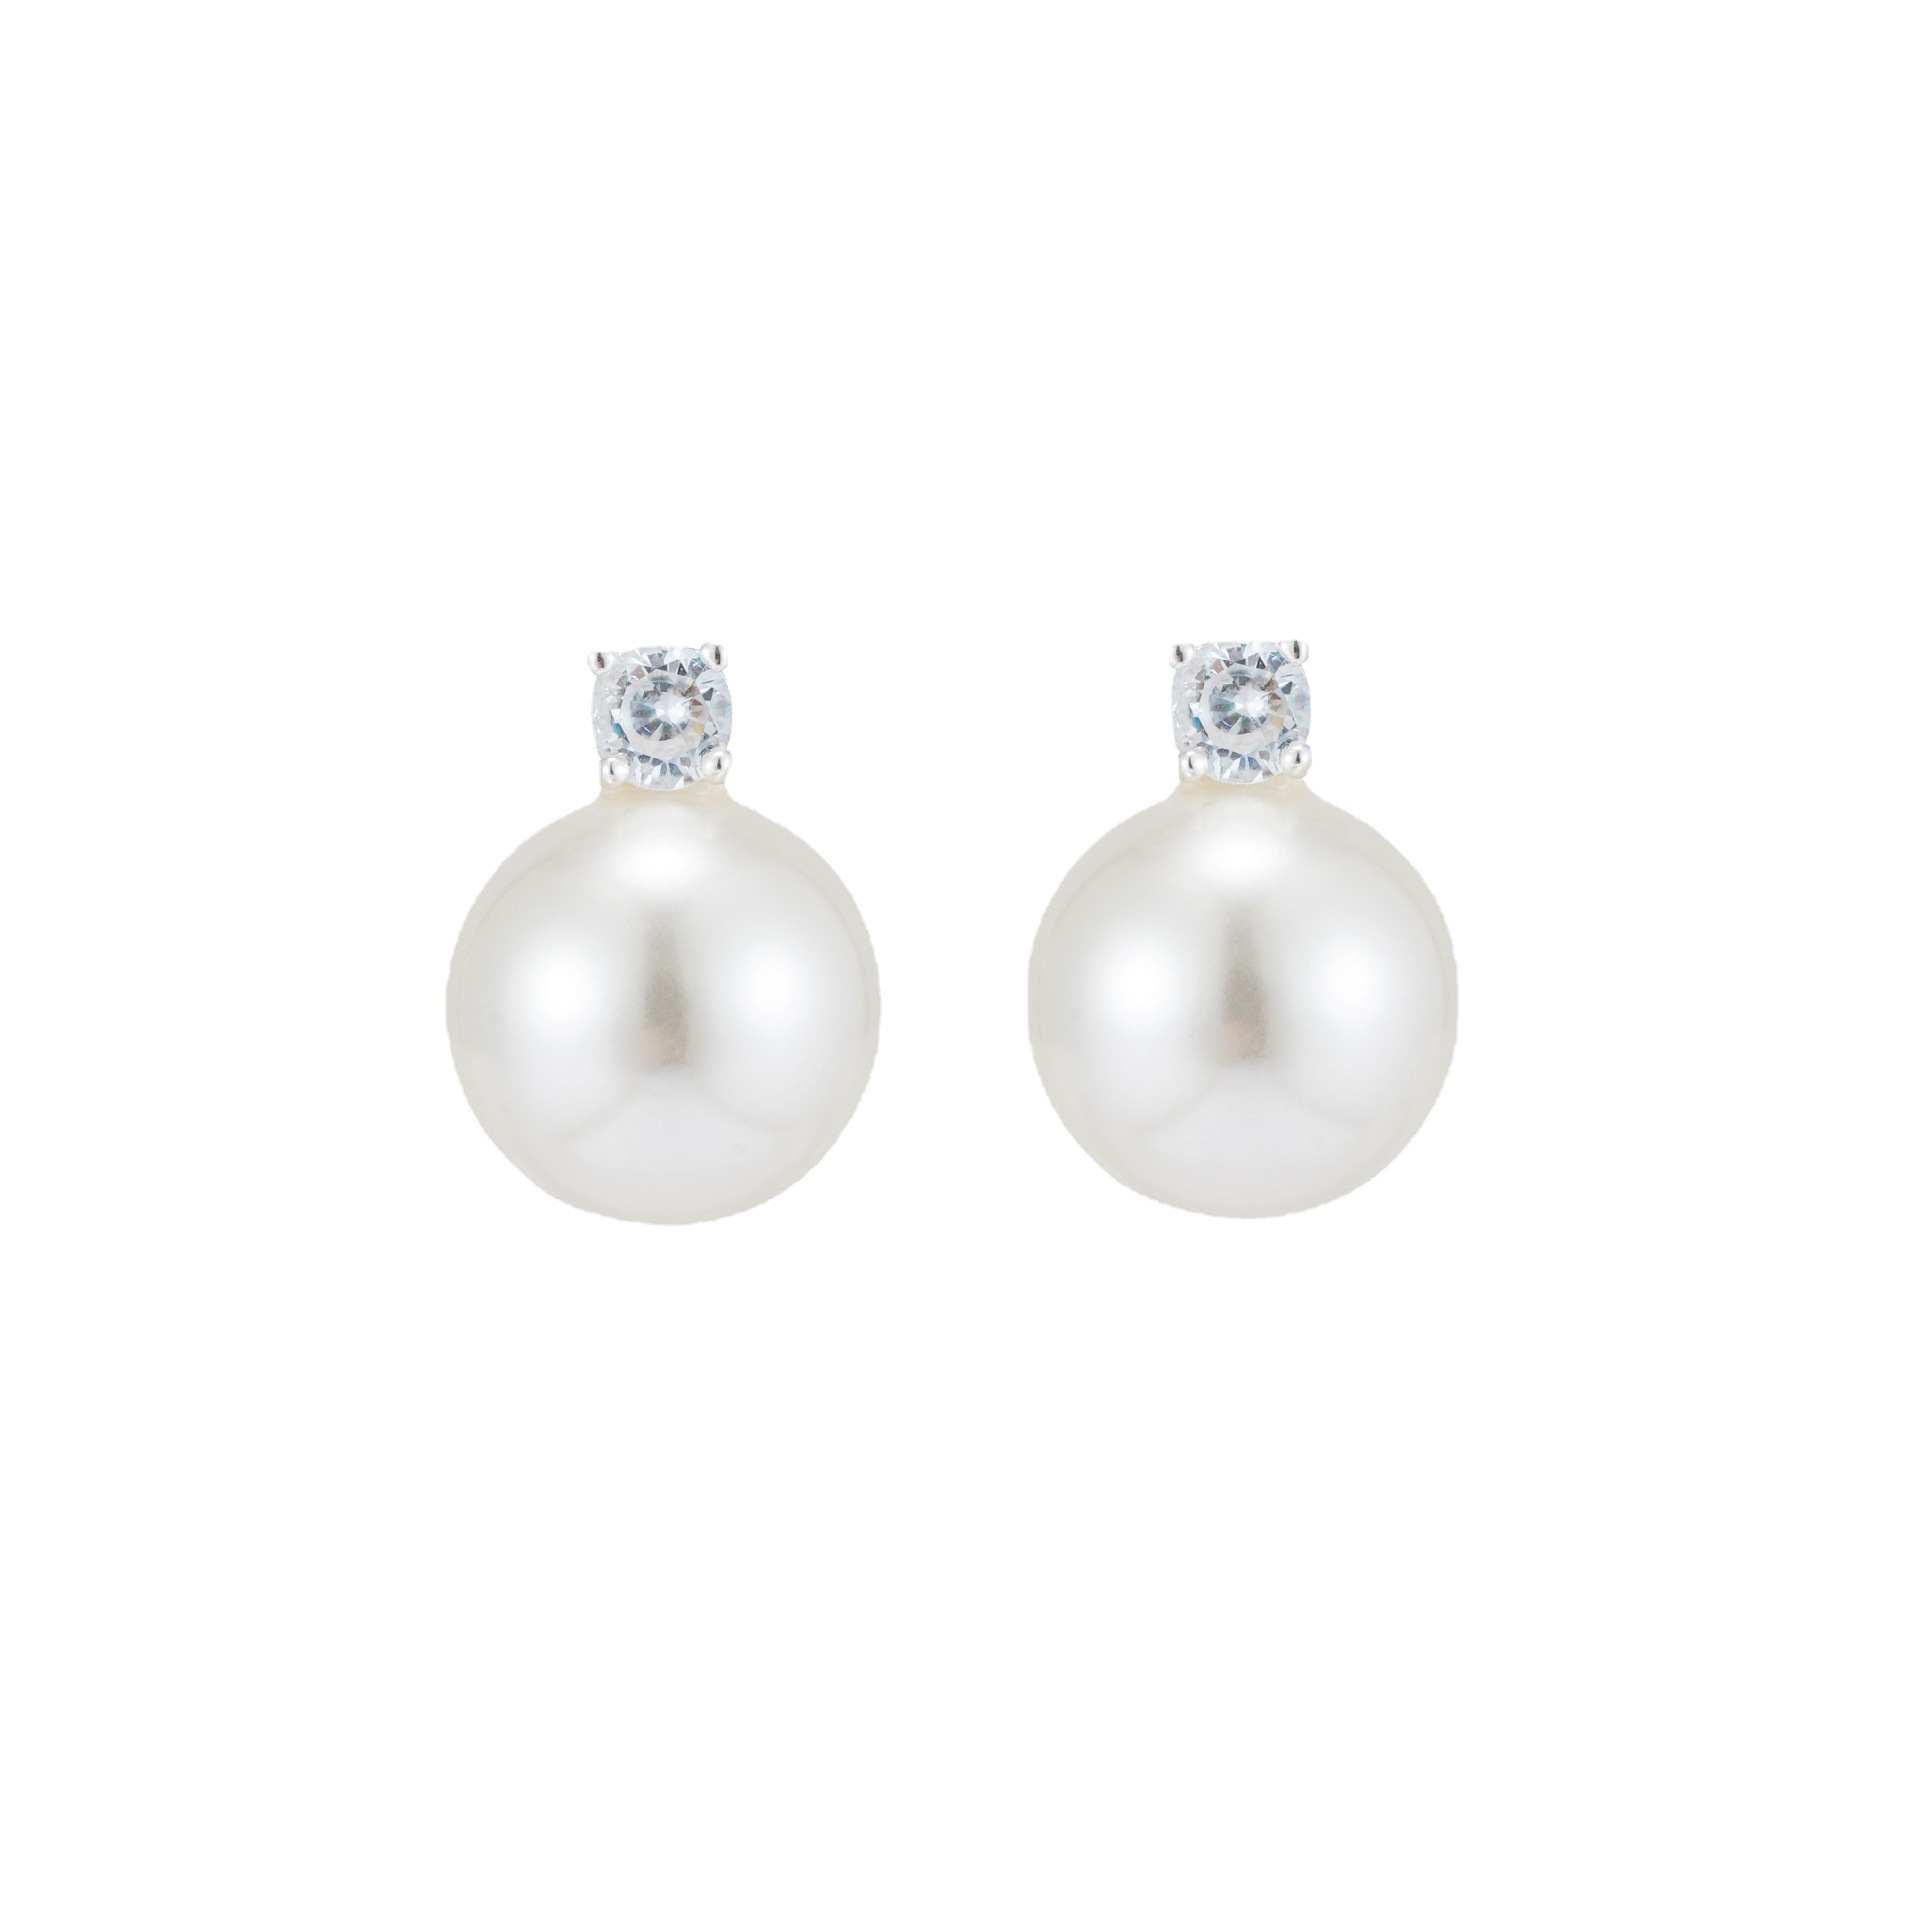 925 Silver Australian White Real Linen Shijia Pearl Stud Earrings Perfect Circle Strong Light Pearl Classic Diana Style Cold Stud Earrings for Women